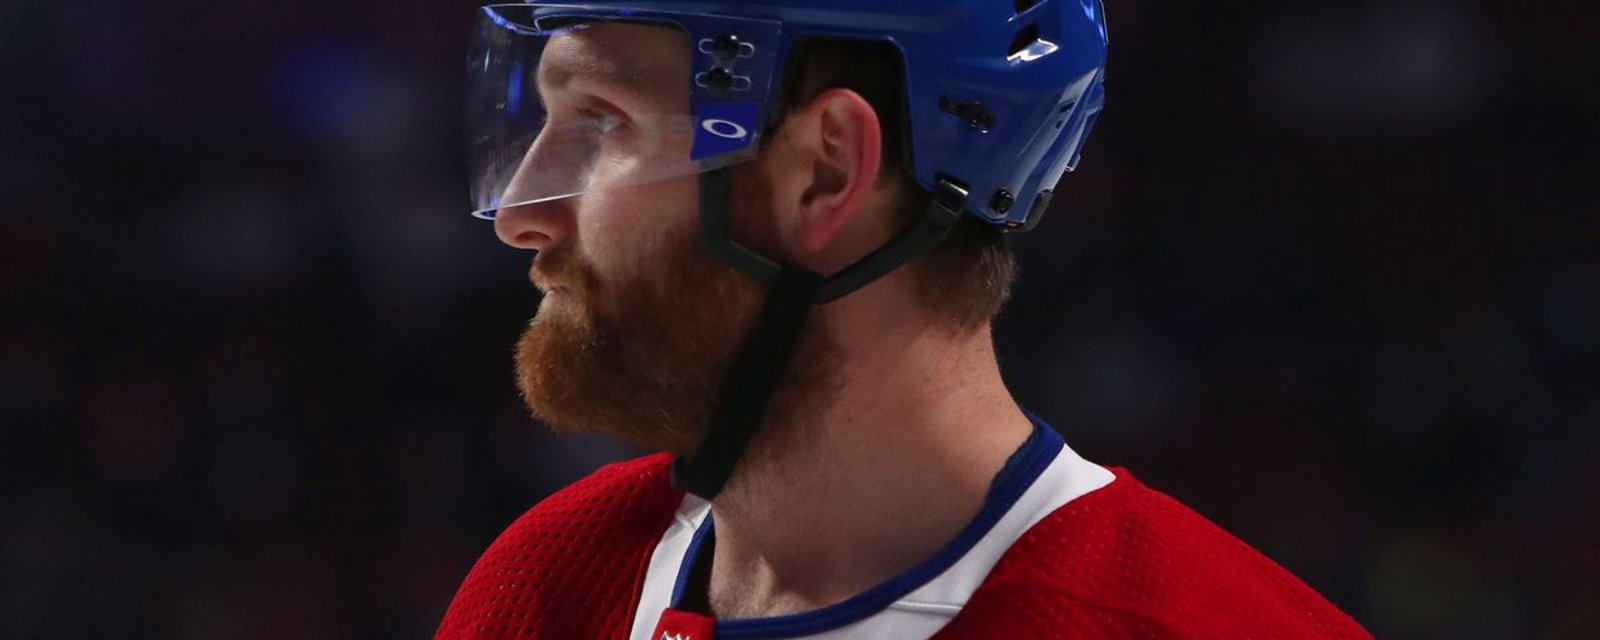 Karl Alzner is ‘open to anything, willing to go anywhere’ to return to NHL 